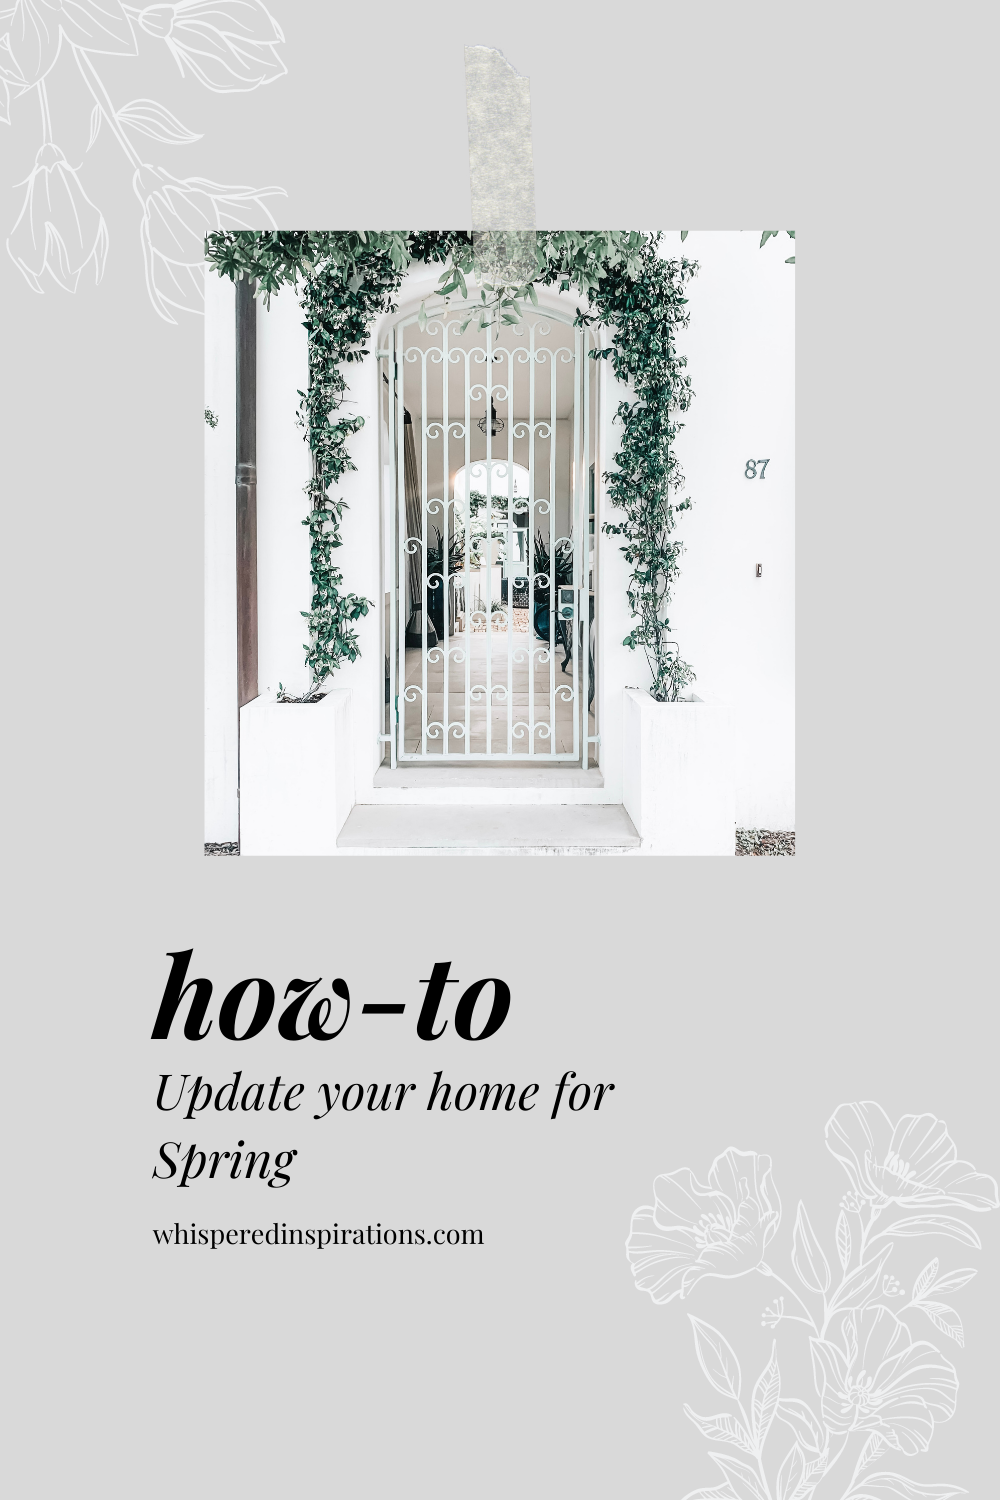 A beautiful white home with greenery hanging over the side gate. This article covers how to update your home for spring.